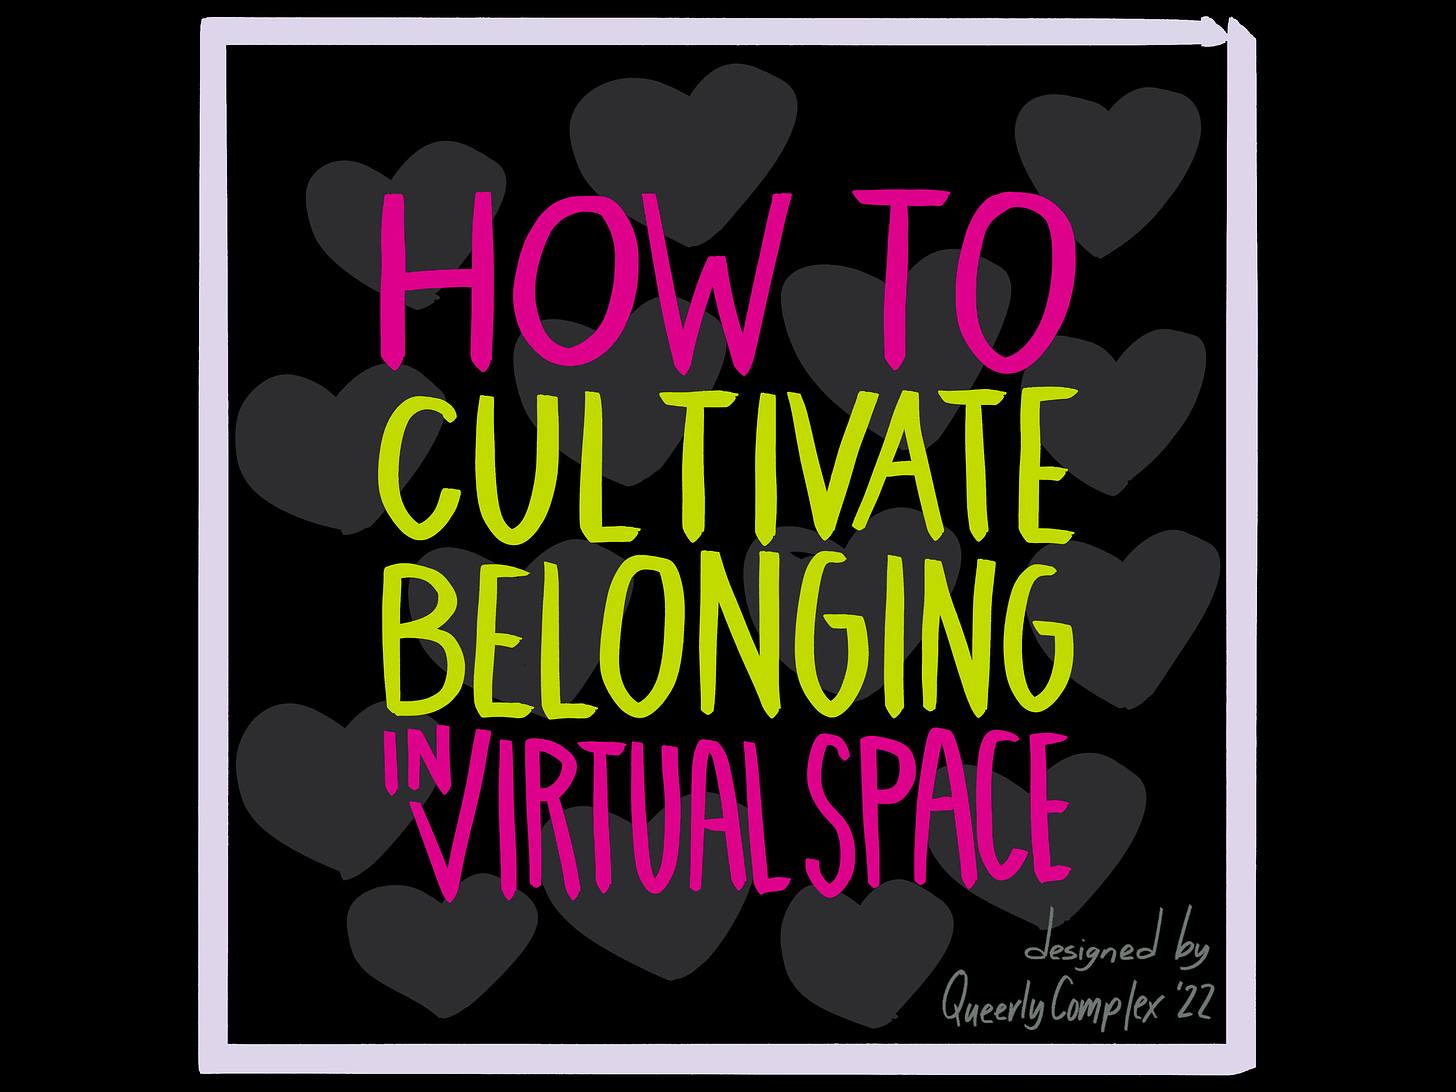 "How to cultivate belonging in virtual space" in hand lettering. It is set agains a number of dark gray hearts. It is outlined in a white box. Designed by Queerly Complex.